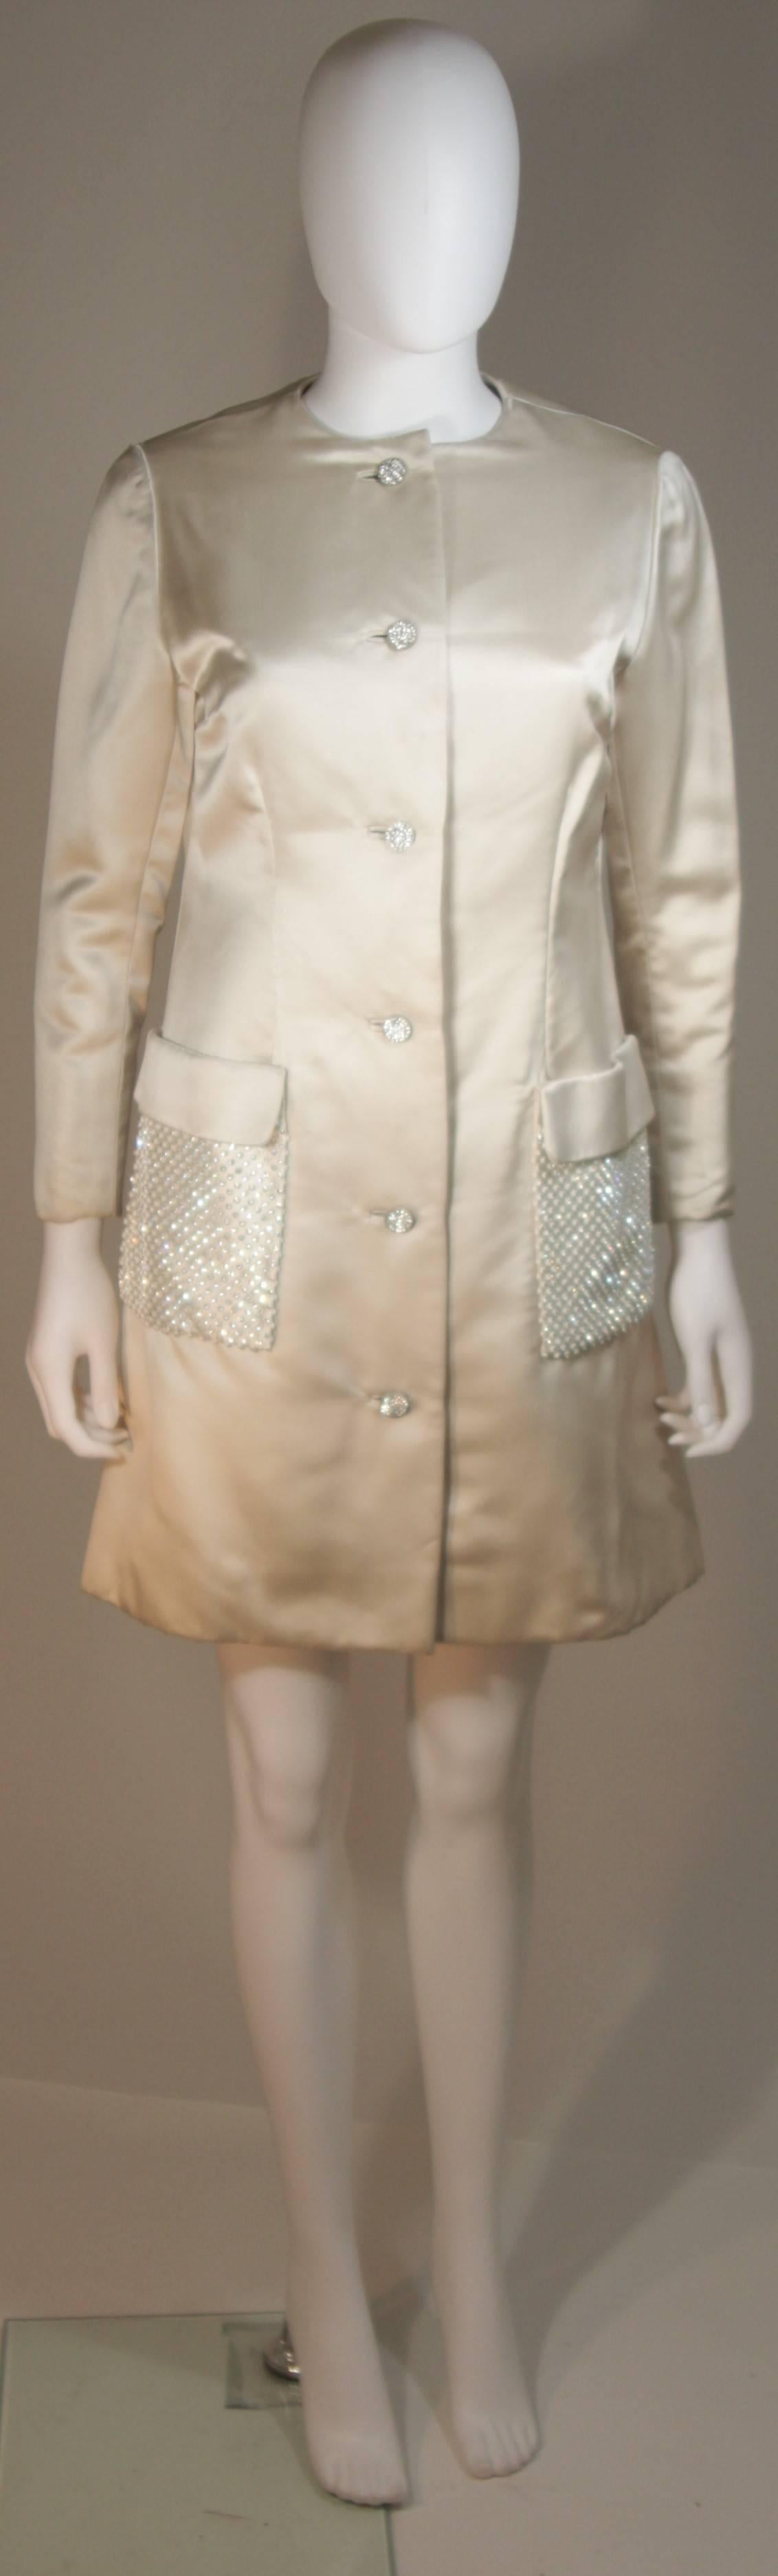 This Shedlock coat style dress is composed of an off-white silk and features rhinestone adorned pockets. There are center front rhinestone closures as well as snaps. In excellent vintage condition. Made in Italy.

**Please cross-reference